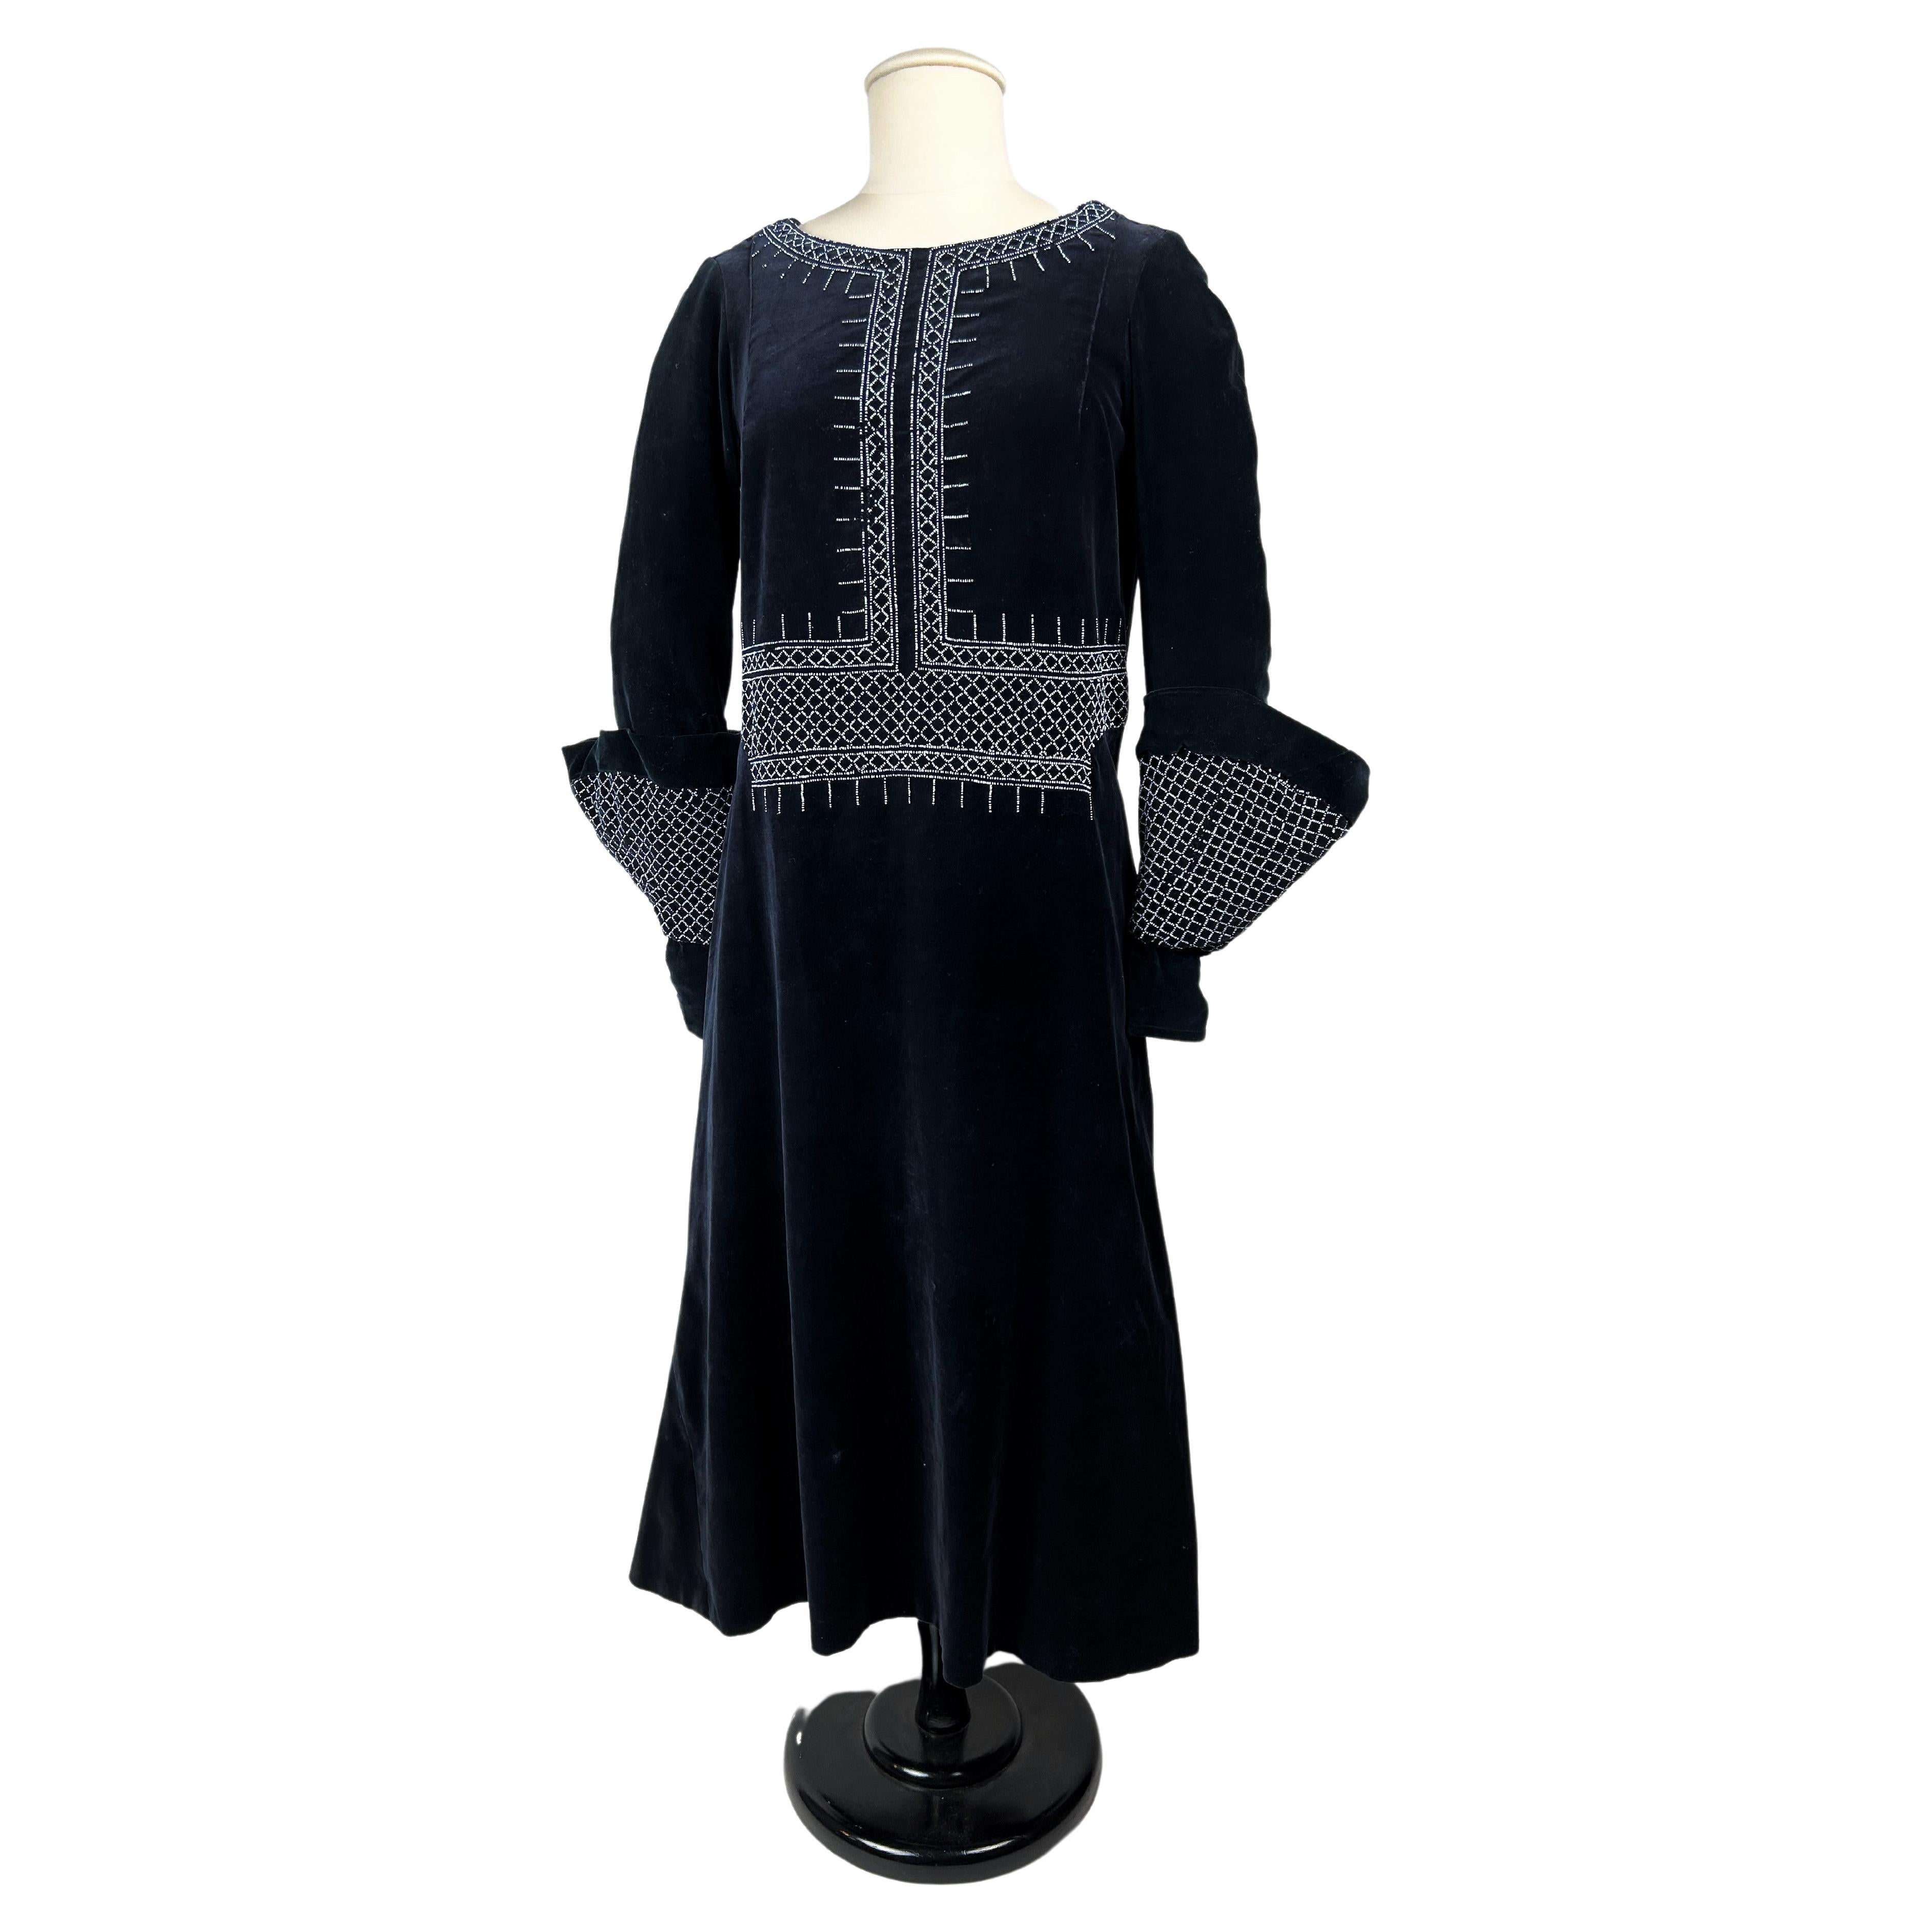 A Navy Velvet Sac Dress with glass beads embroideries - France Circa 1925-1930 For Sale